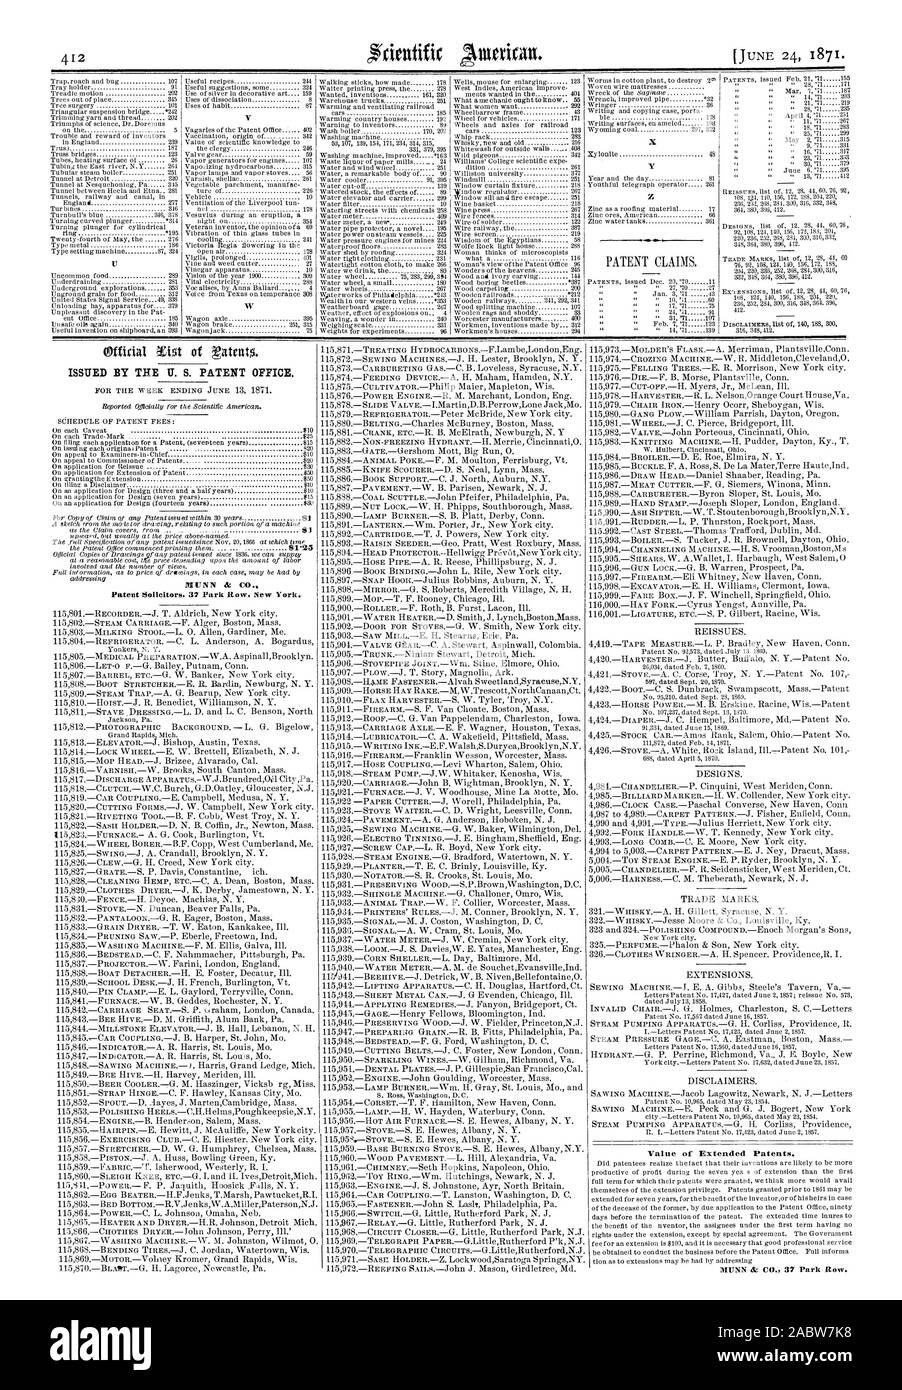 ISSUED BY THE U. S. PATENT OFFICE MUNN & CO. Patent Solicitors. 37 Park Row New York. Value of Extended Patents. MUNN & CO. 37 Park Row., scientific american, 1871-06-24 Stock Photo